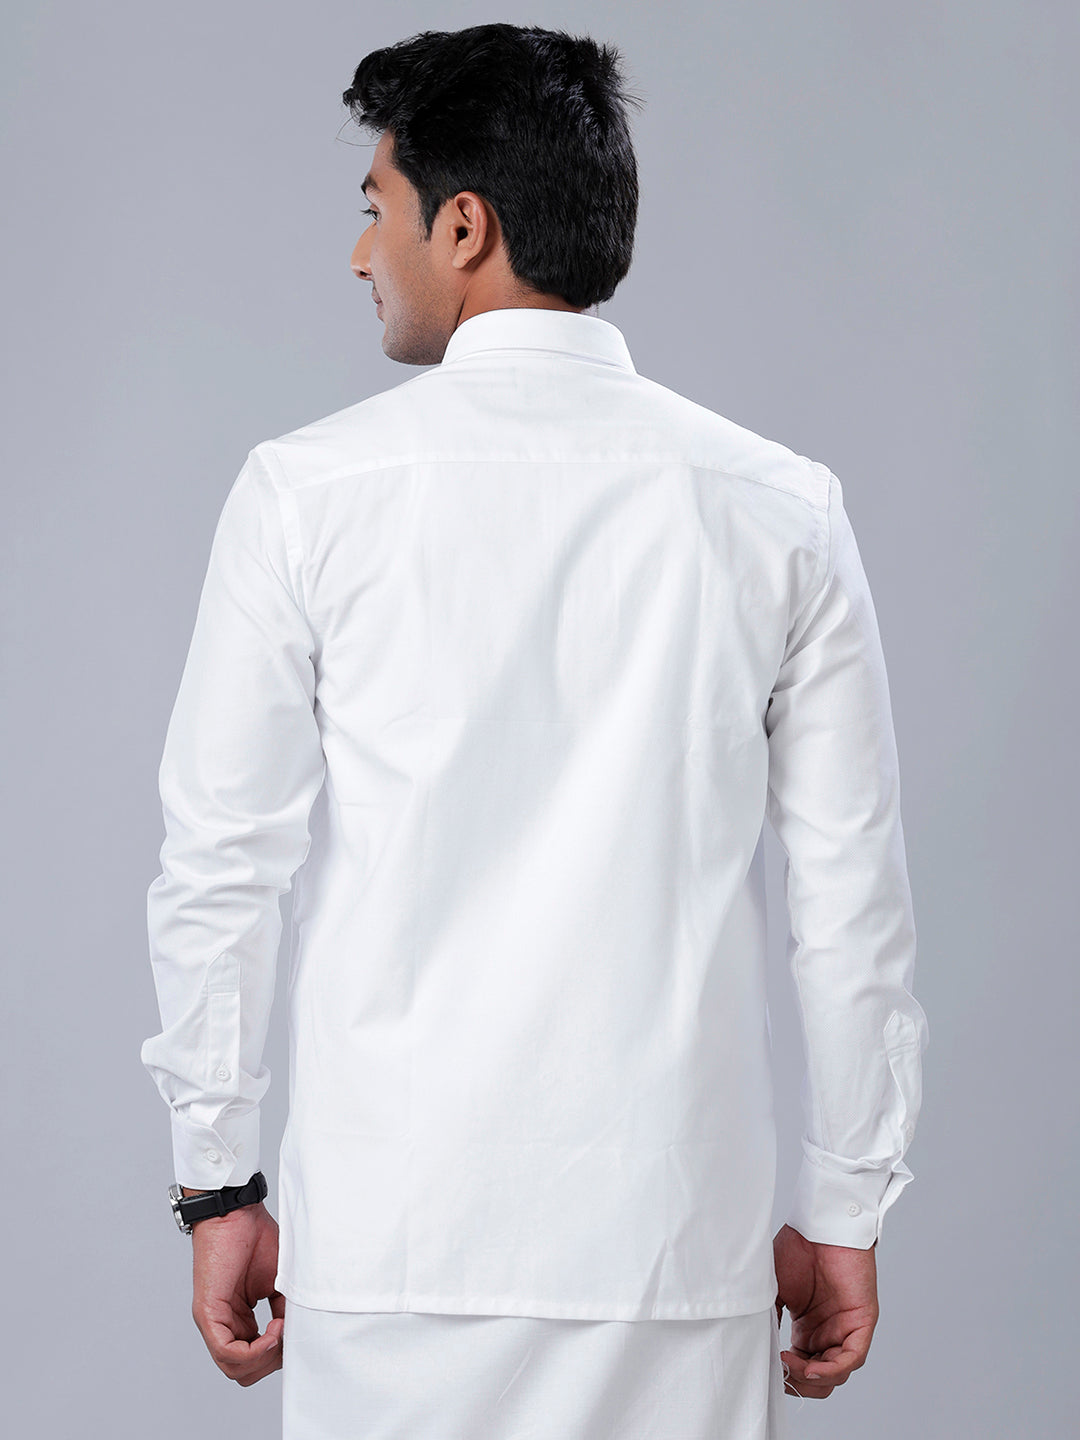 Mens Premium Pure Cotton White Shirt Full Sleeves Limited Edition 1-Back view